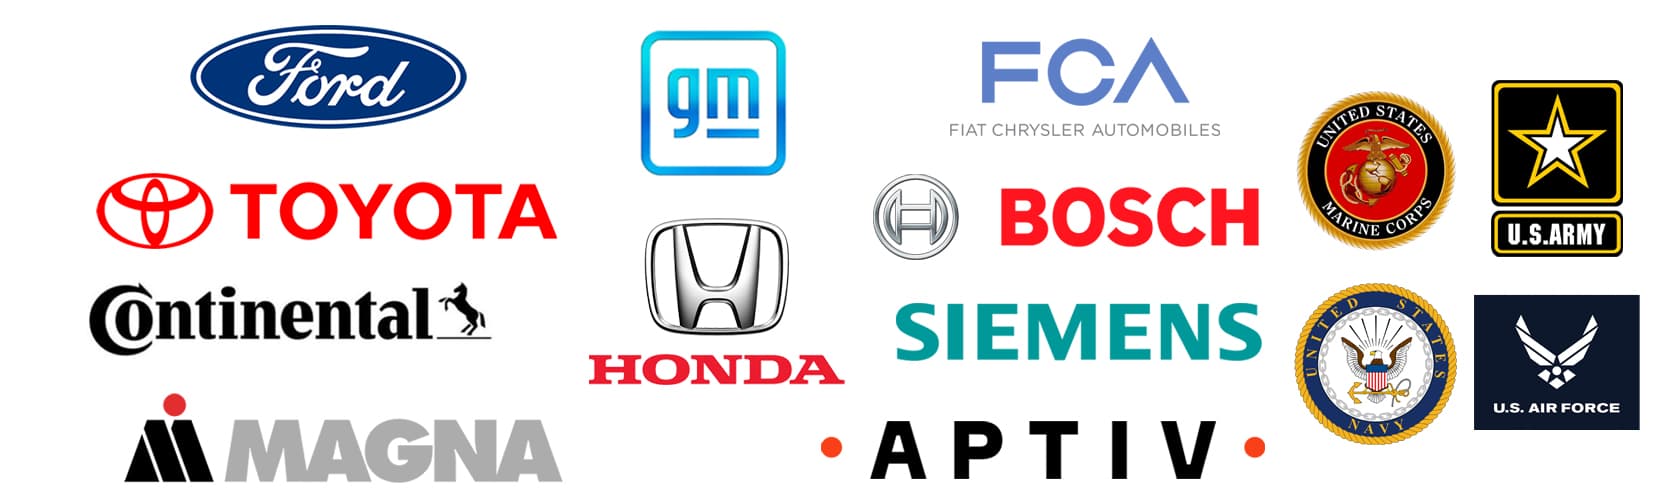 logos for: ford, FCA, gm, magna, aptiv, bosch, Siemens, Honda, Toyota and the armed forces